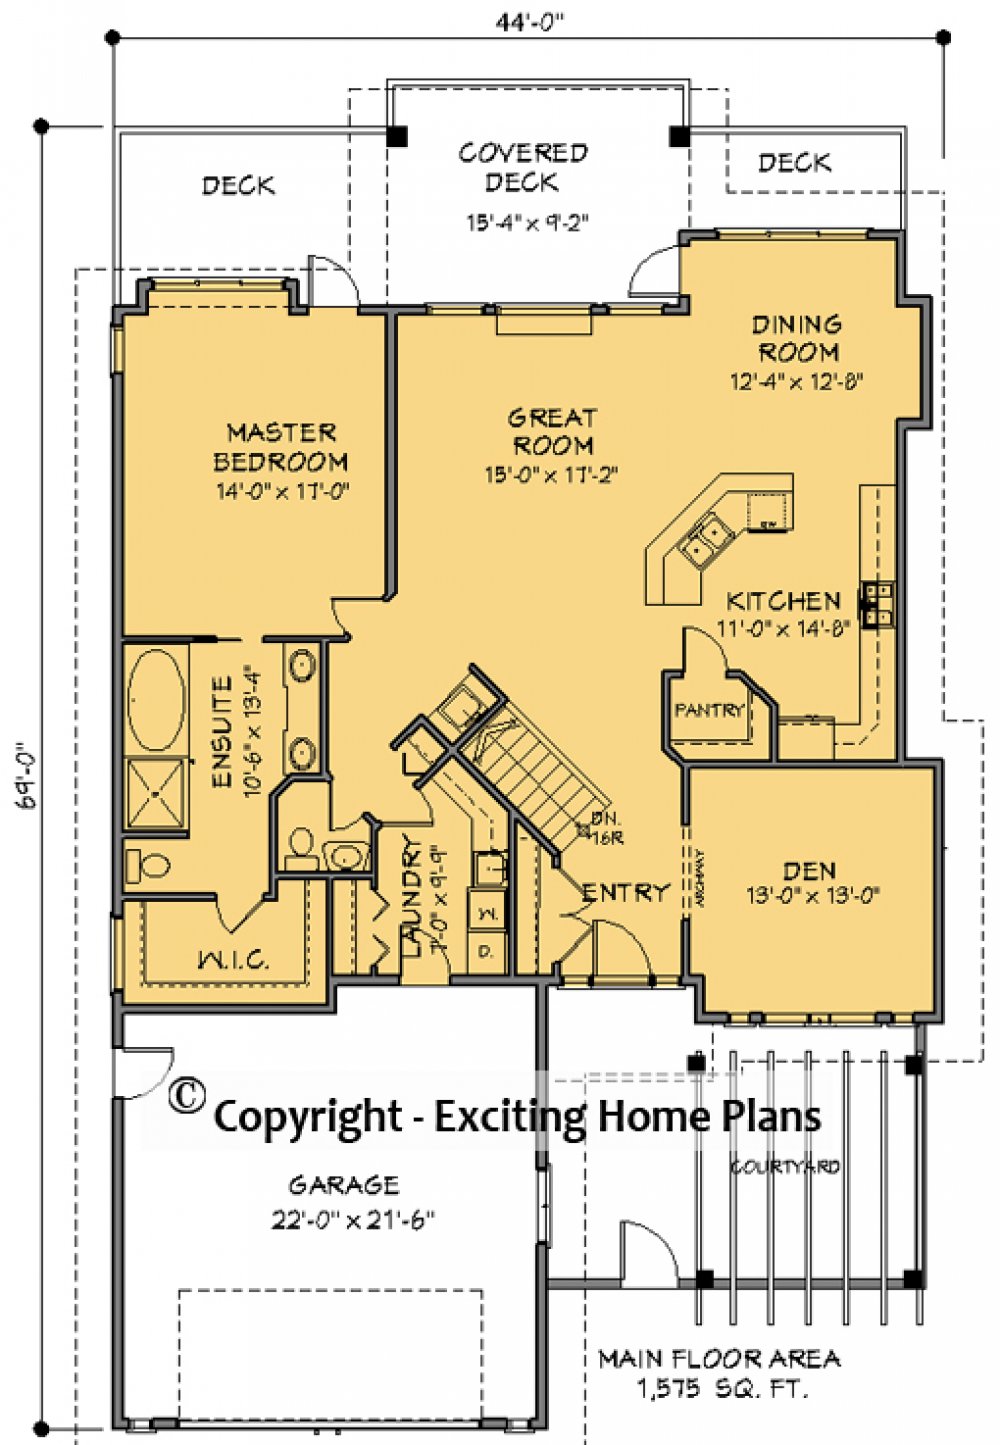 House Plan Information for Marshall IV